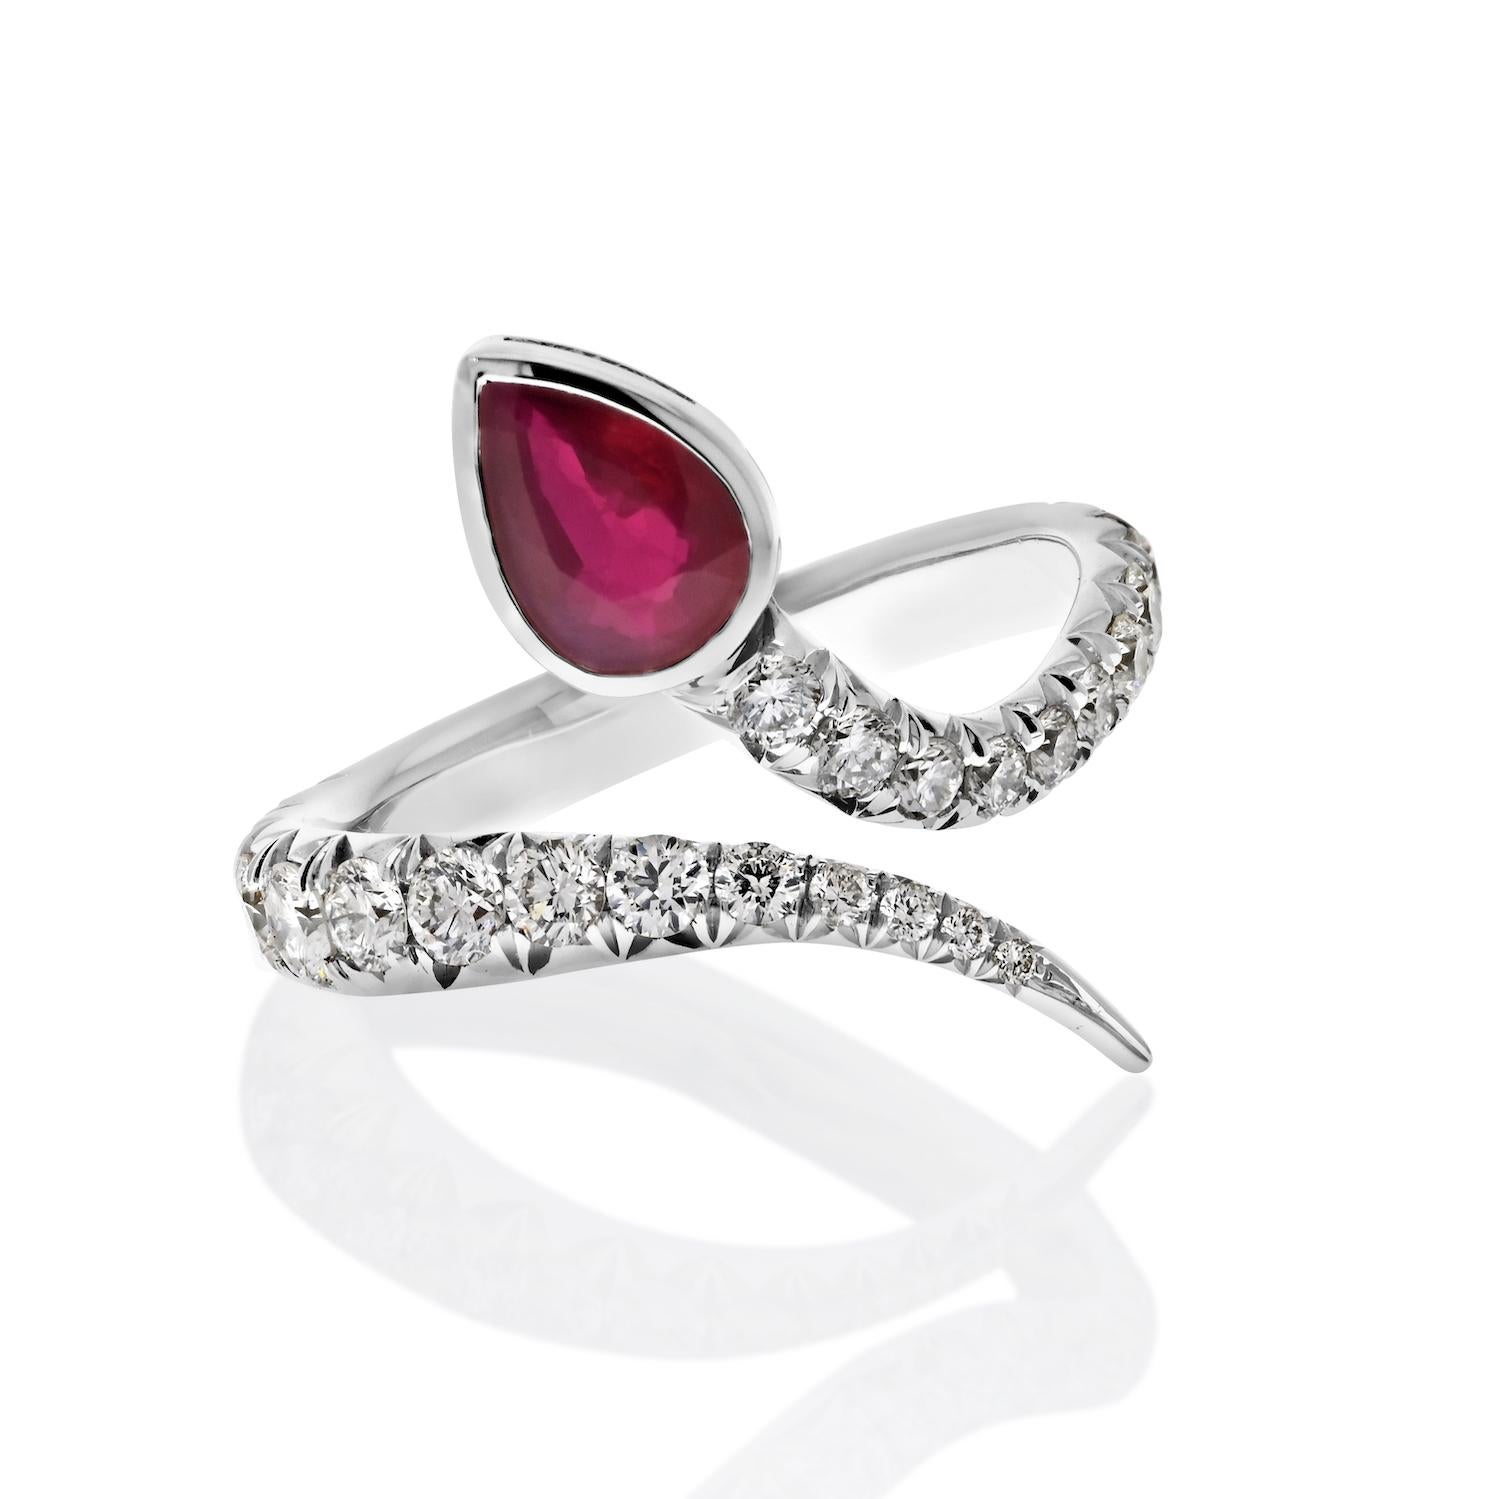 Unveiling the Majestic Serpent: Platinum Diamond and Ruby Wrap Serpent Handmade Ring
Step into a world of enchantment with this exquisitely handcrafted platinum ring. The design encapsulates the grace and allure of a serpent elegantly wrapping